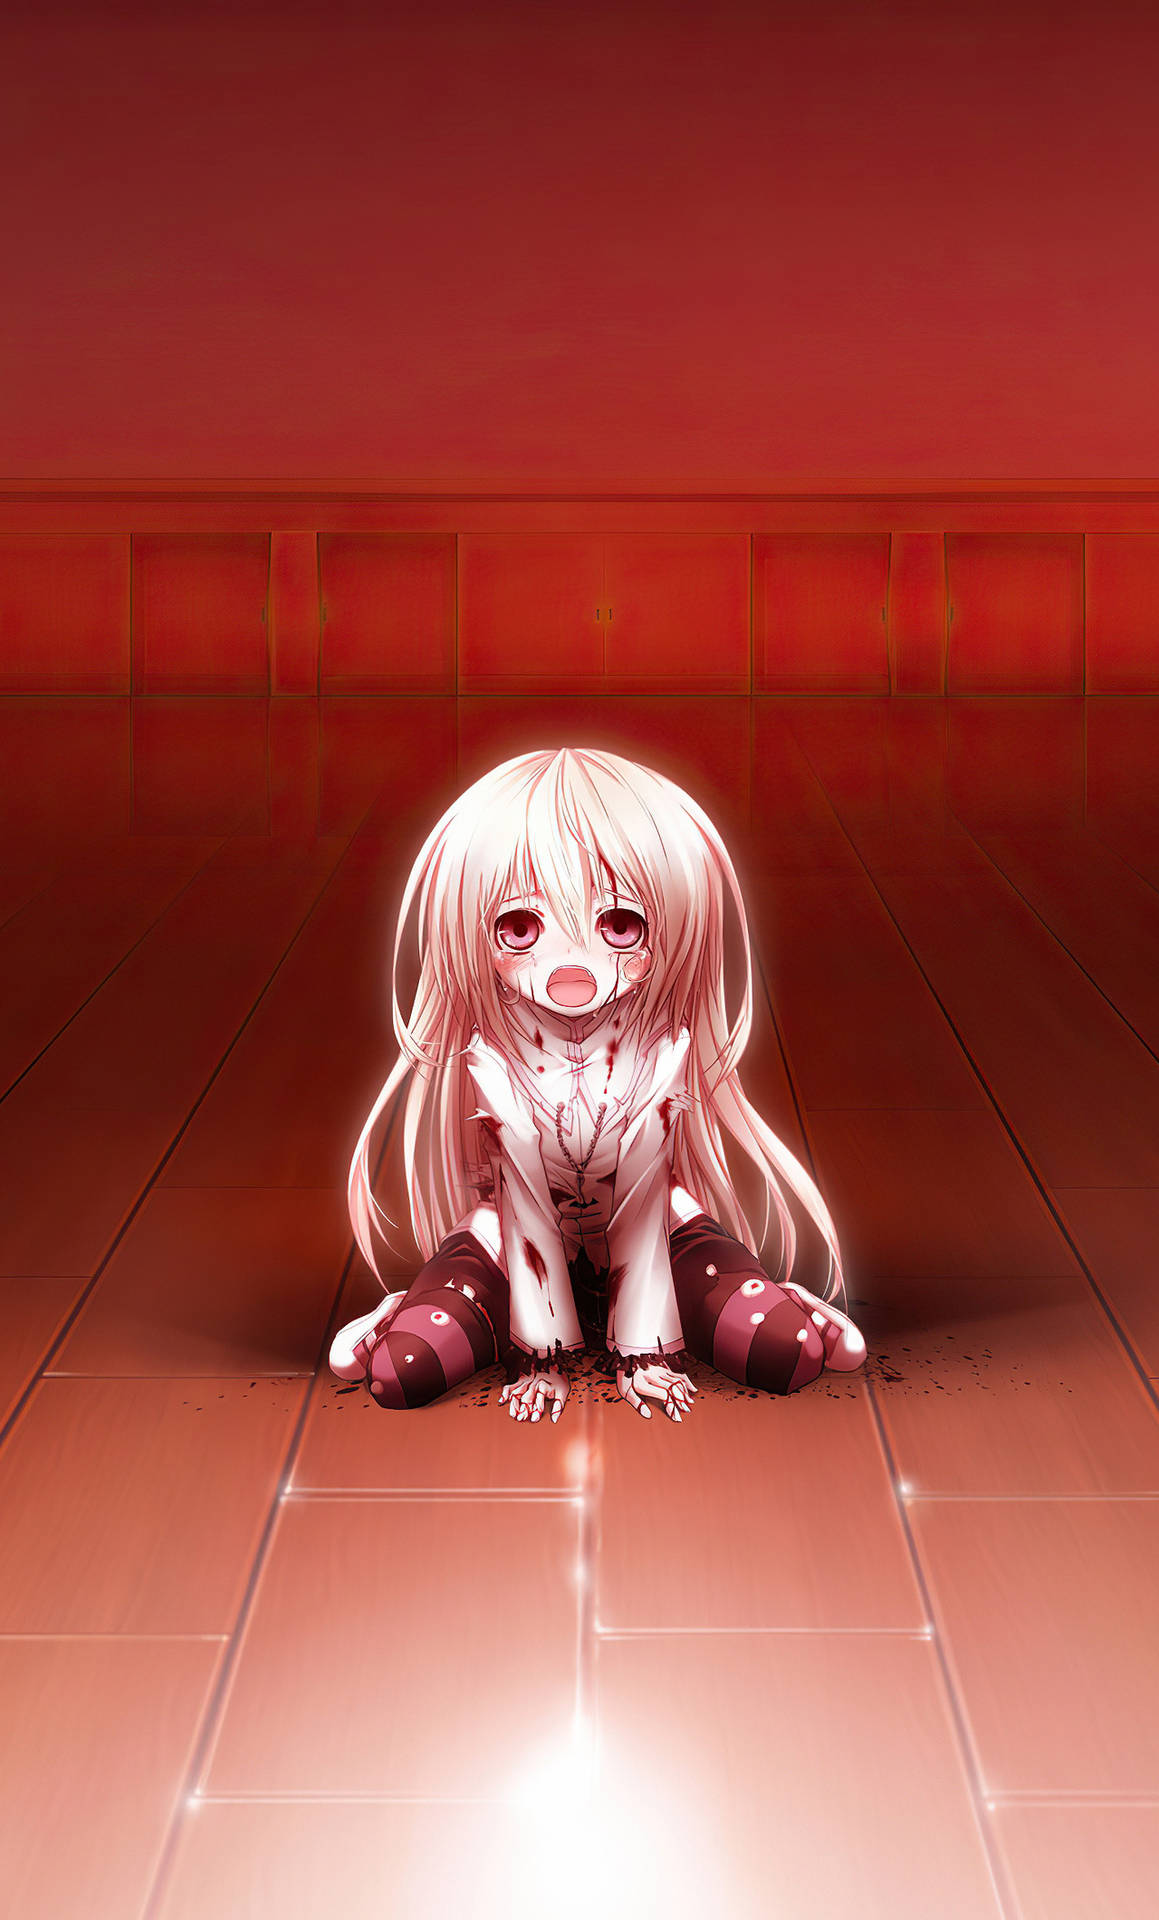 A Girl Sitting On The Floor With A Light Shining On Her Wallpaper